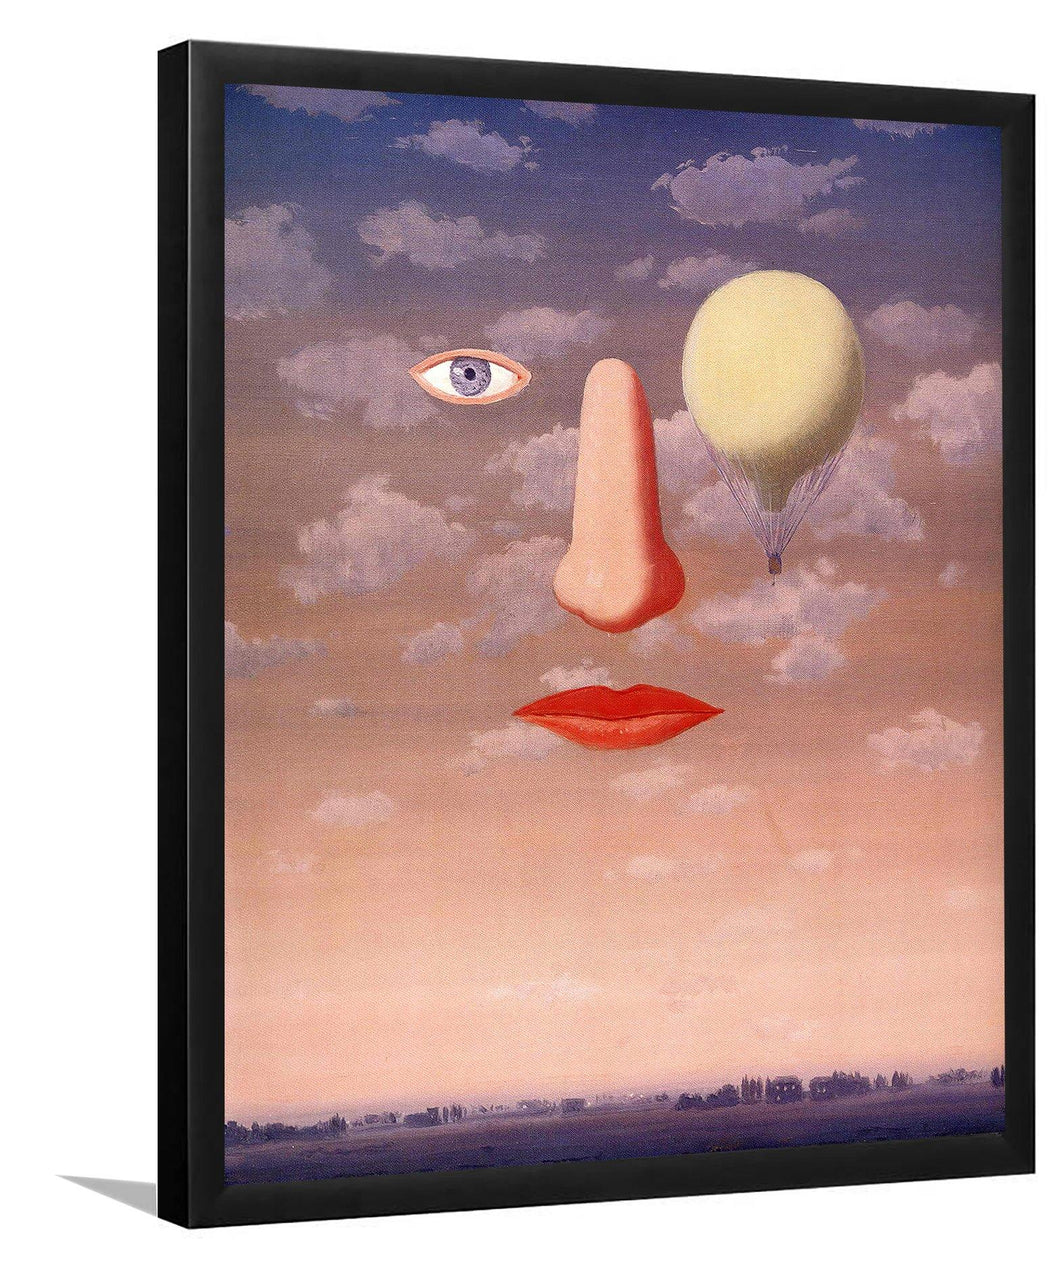 The Beautiful Relations 1967 by Rene Magritte-Art Print, Frame Art, Plexiglas Cover